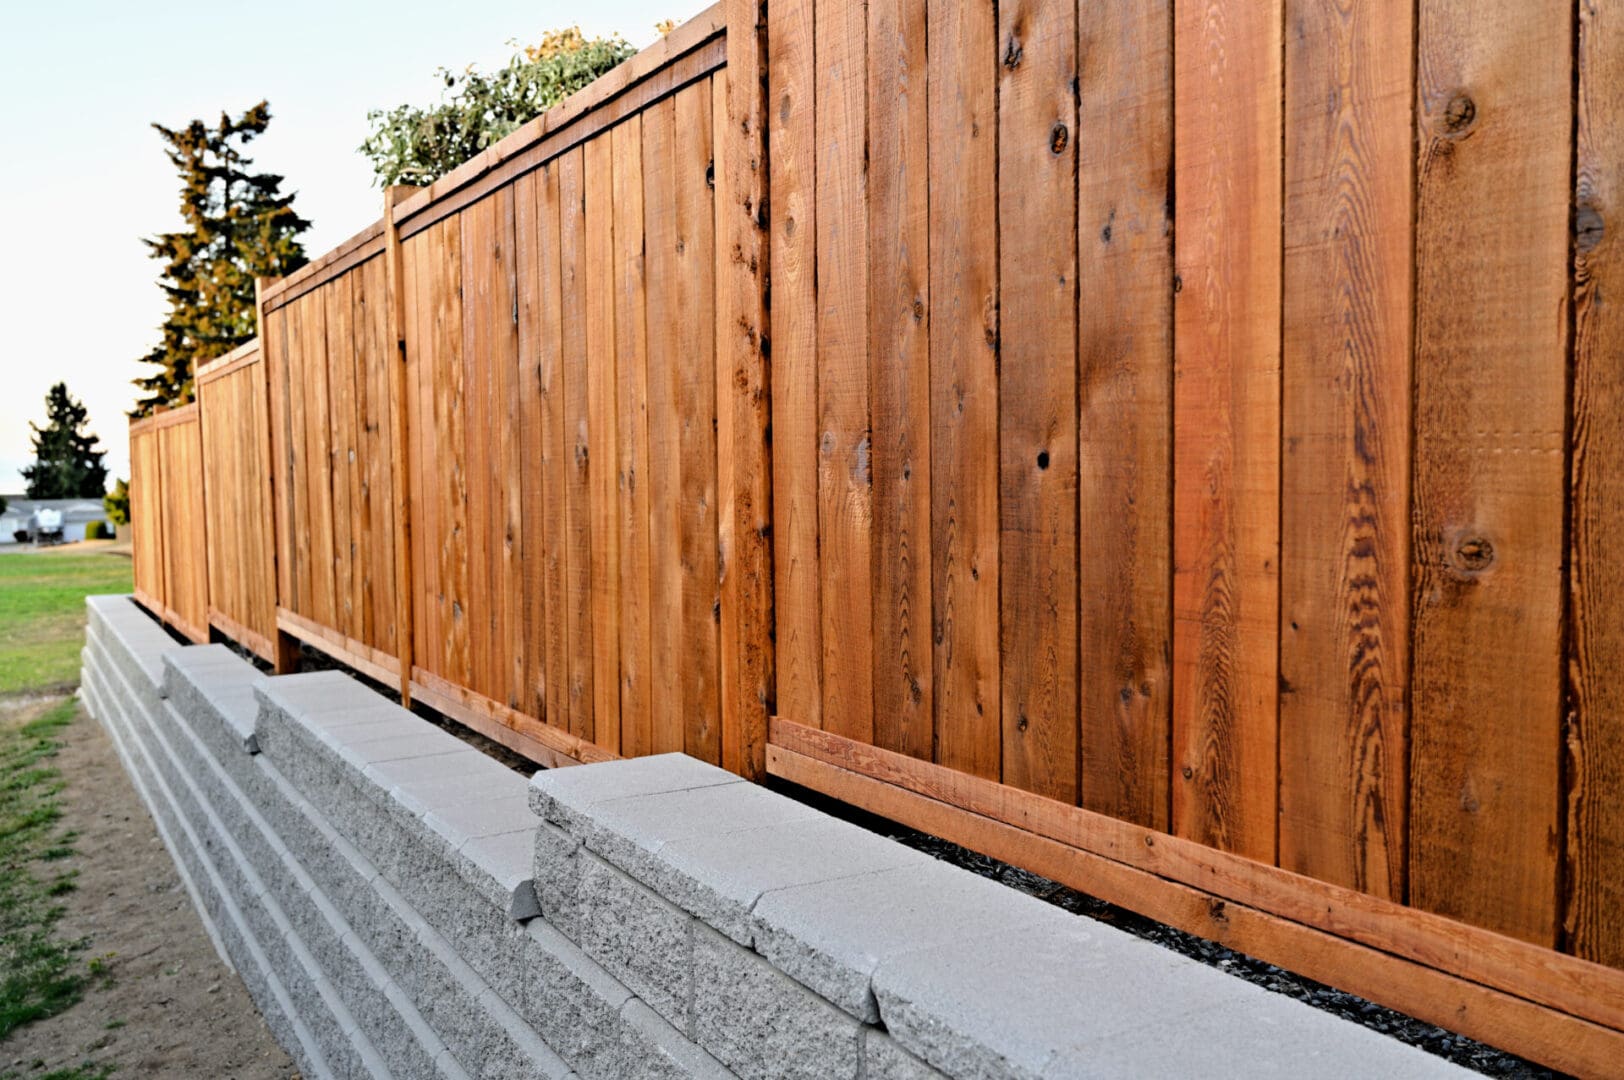 A wooden fence with concrete blocks in the middle of it.